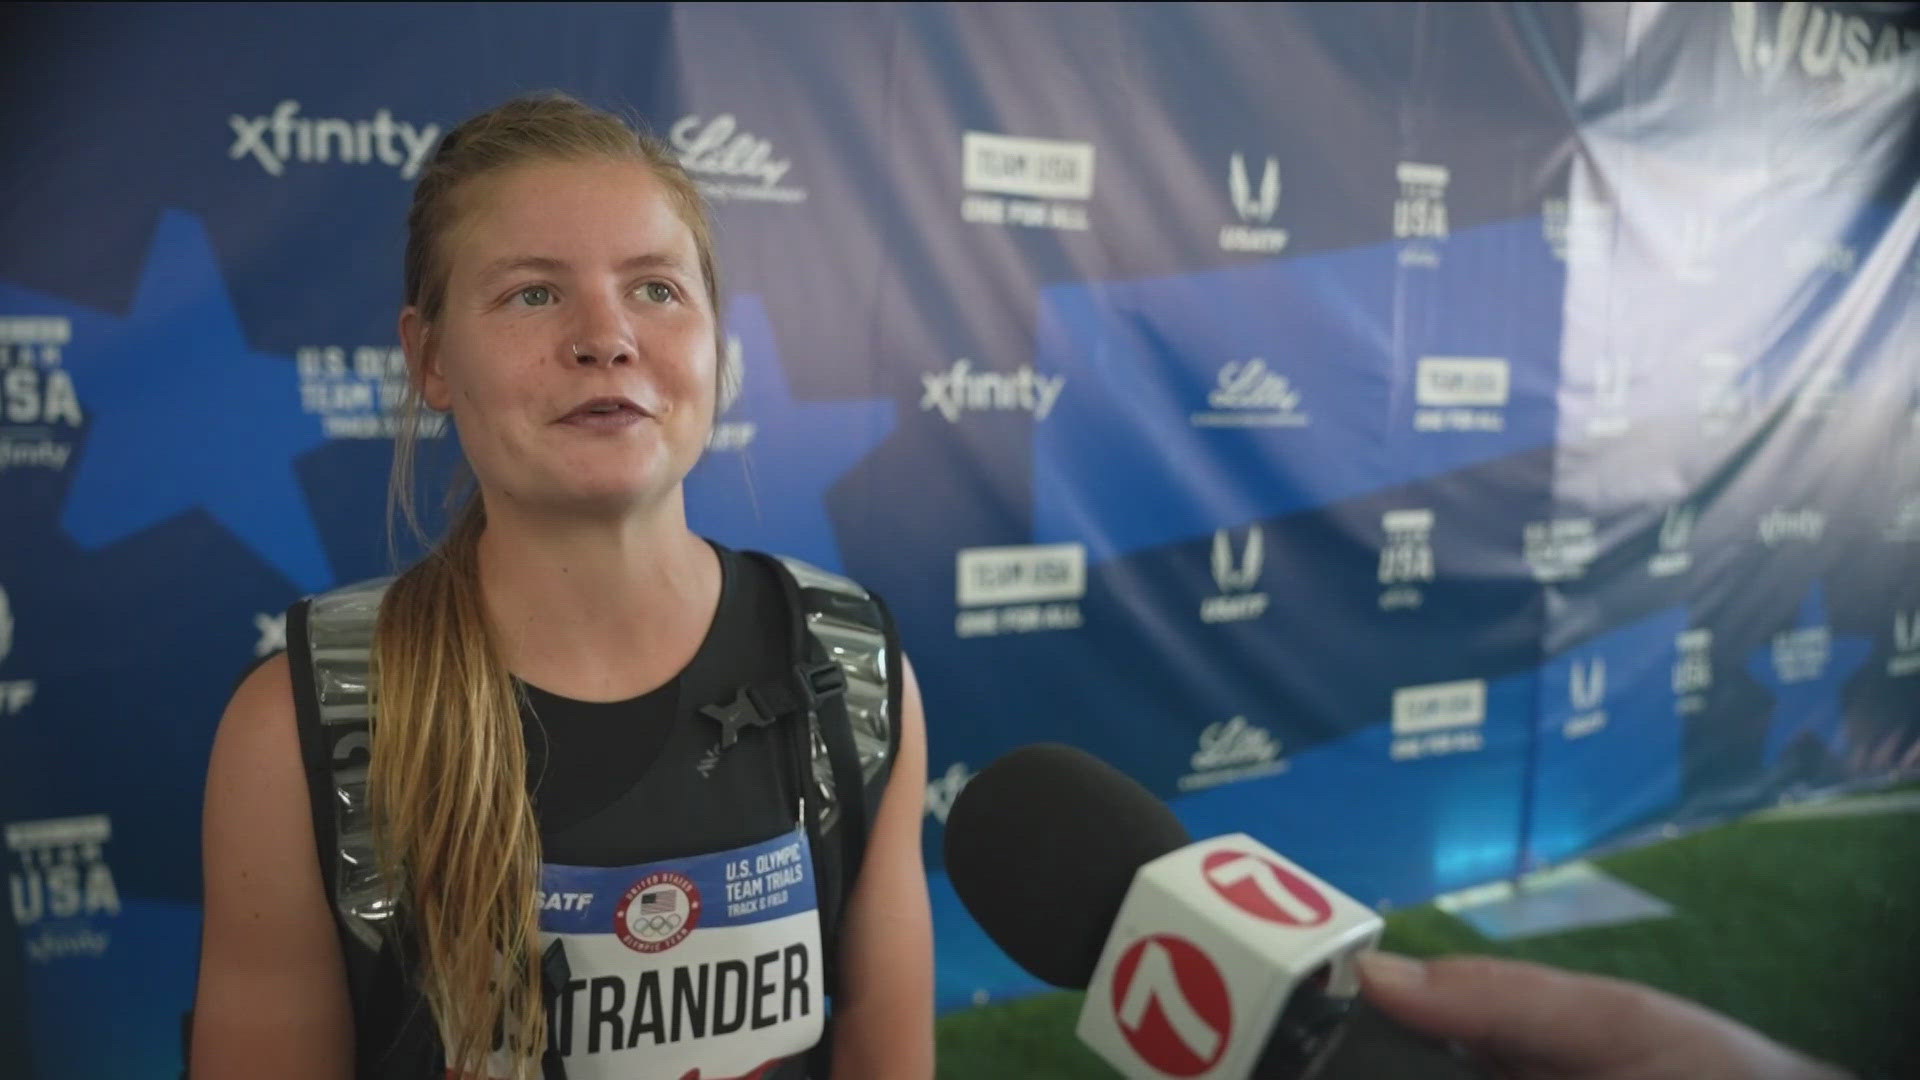 Lexy Halladay-Lowry, Marisa Howard and Allie Ostrander take center stage Thursday night at Hayward Field with an opportunity to qualify for the 2024 Paris Olympics.